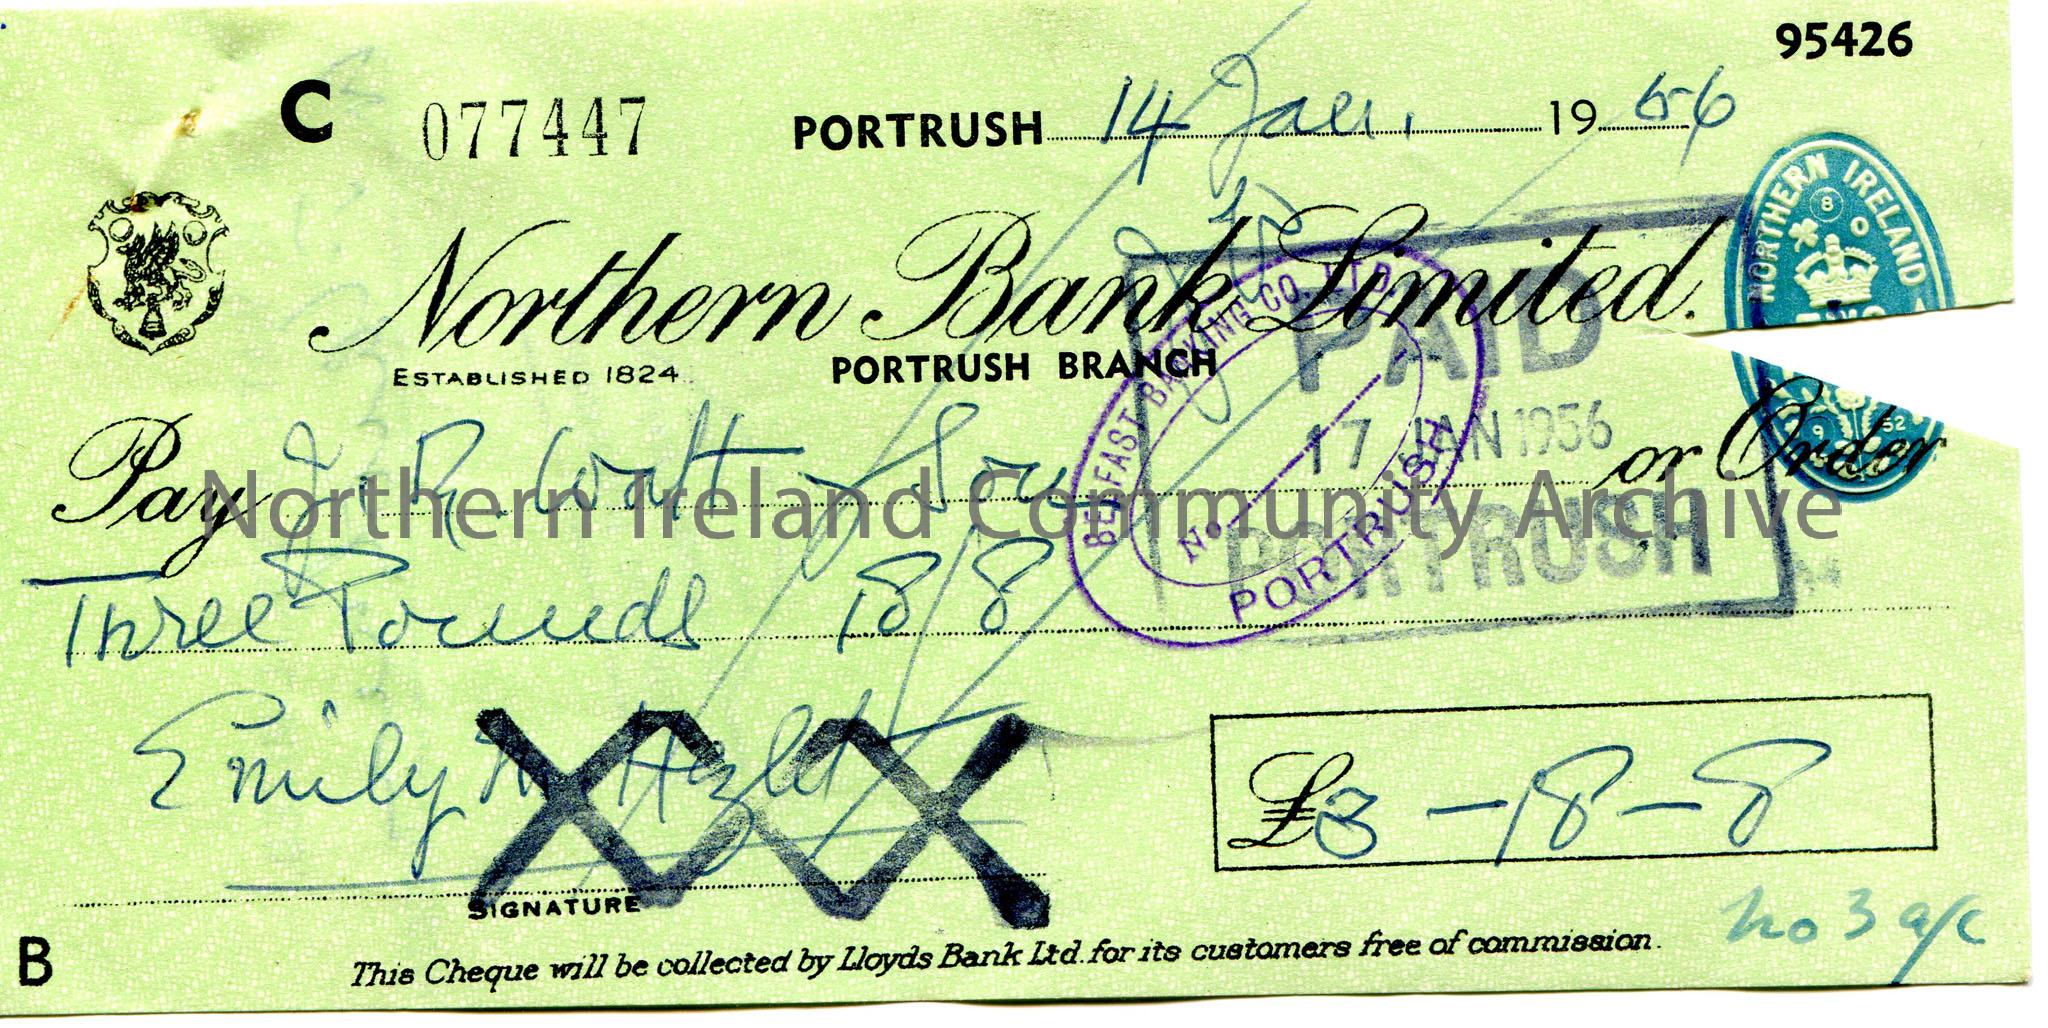 Northern Bank Limited, Portrush branch, cheque. Dated 14th January, 1956. Payable to J. R. Watt & Son from Emily M. Hezlet for £3.18.8. Scored ou…